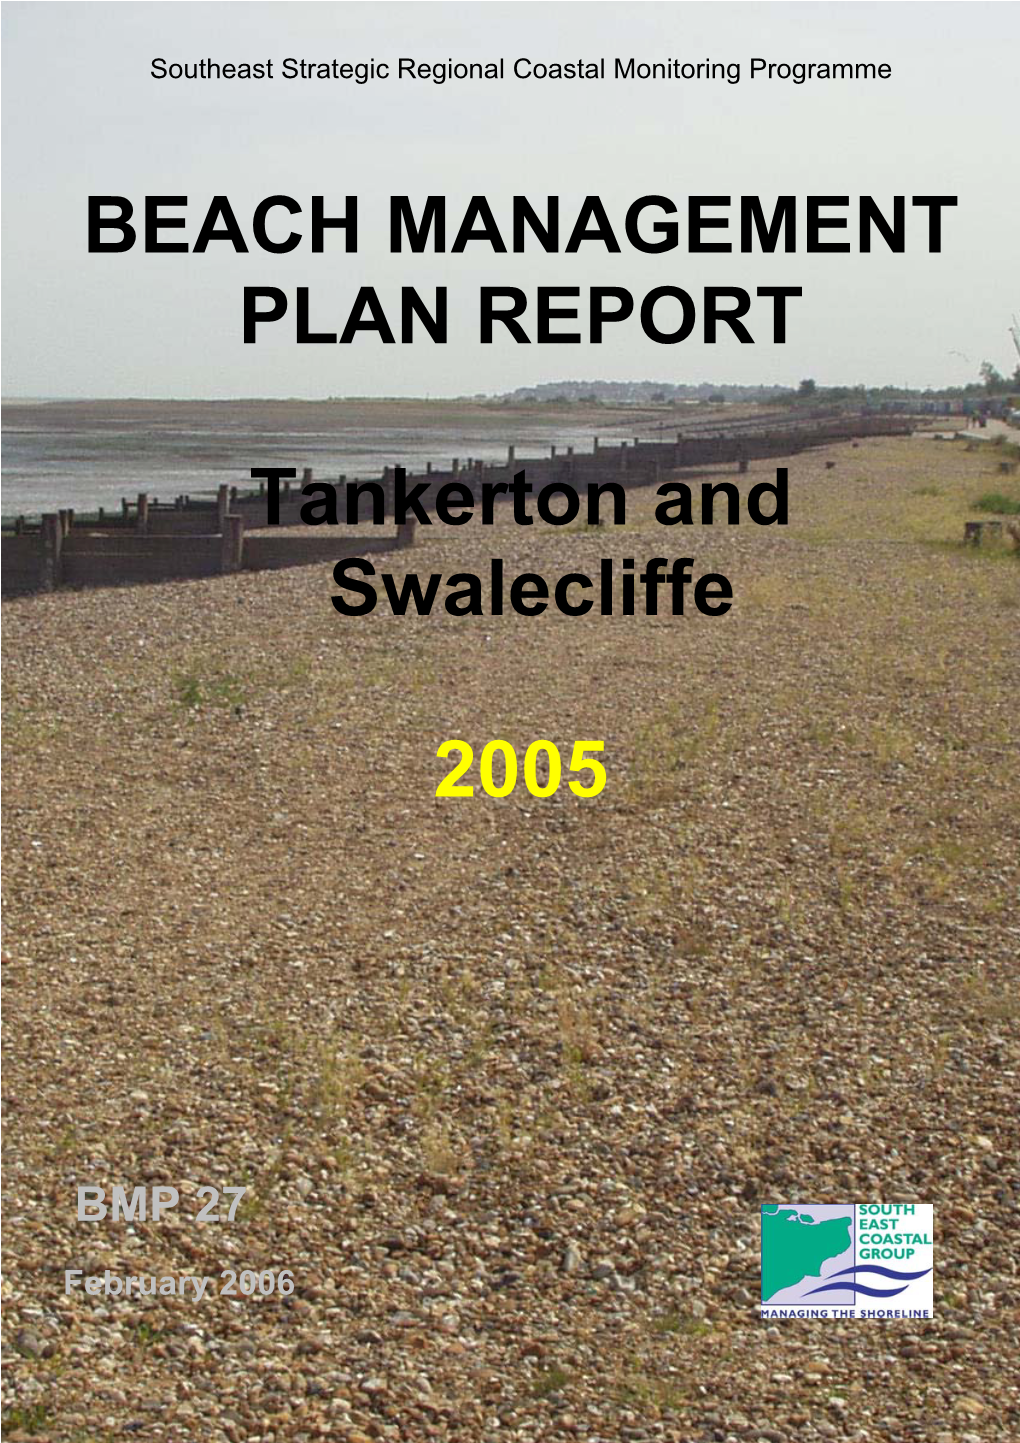 BEACH MANAGEMENT PLAN REPORT Tankerton and Swalecliffe 2005